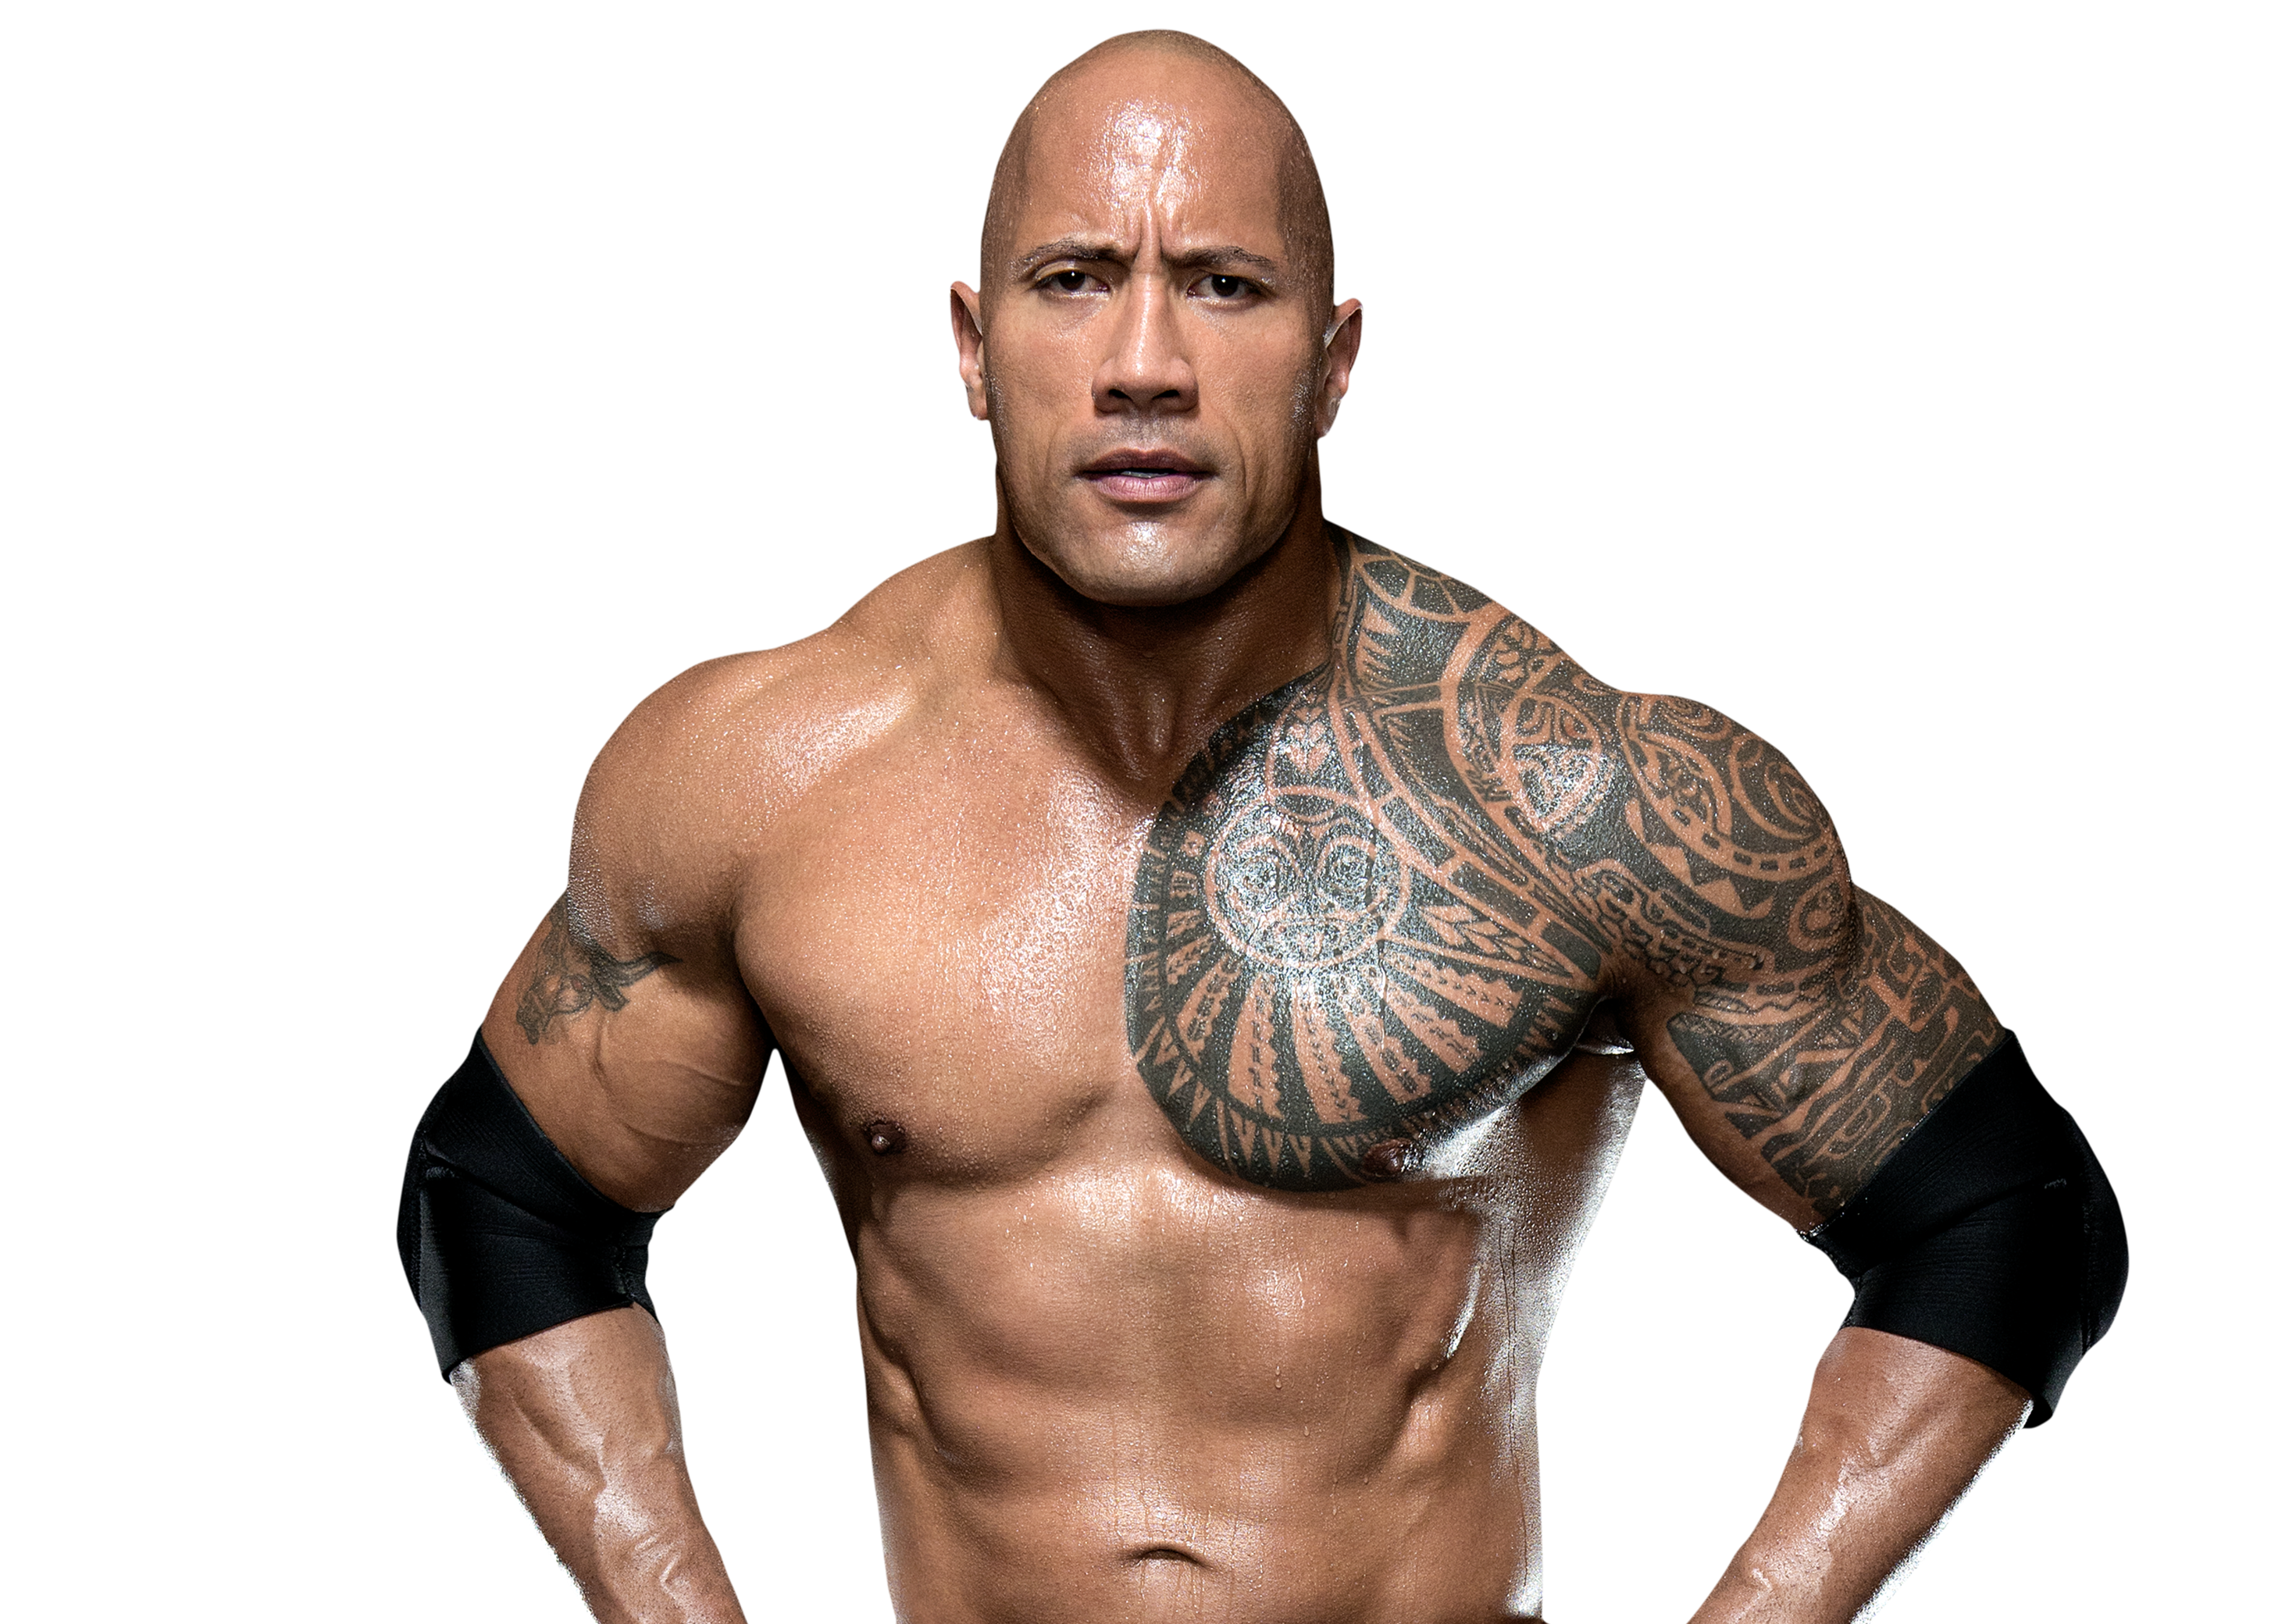 Dwayne Johnson Net Worth, Age, Height, Parents, More